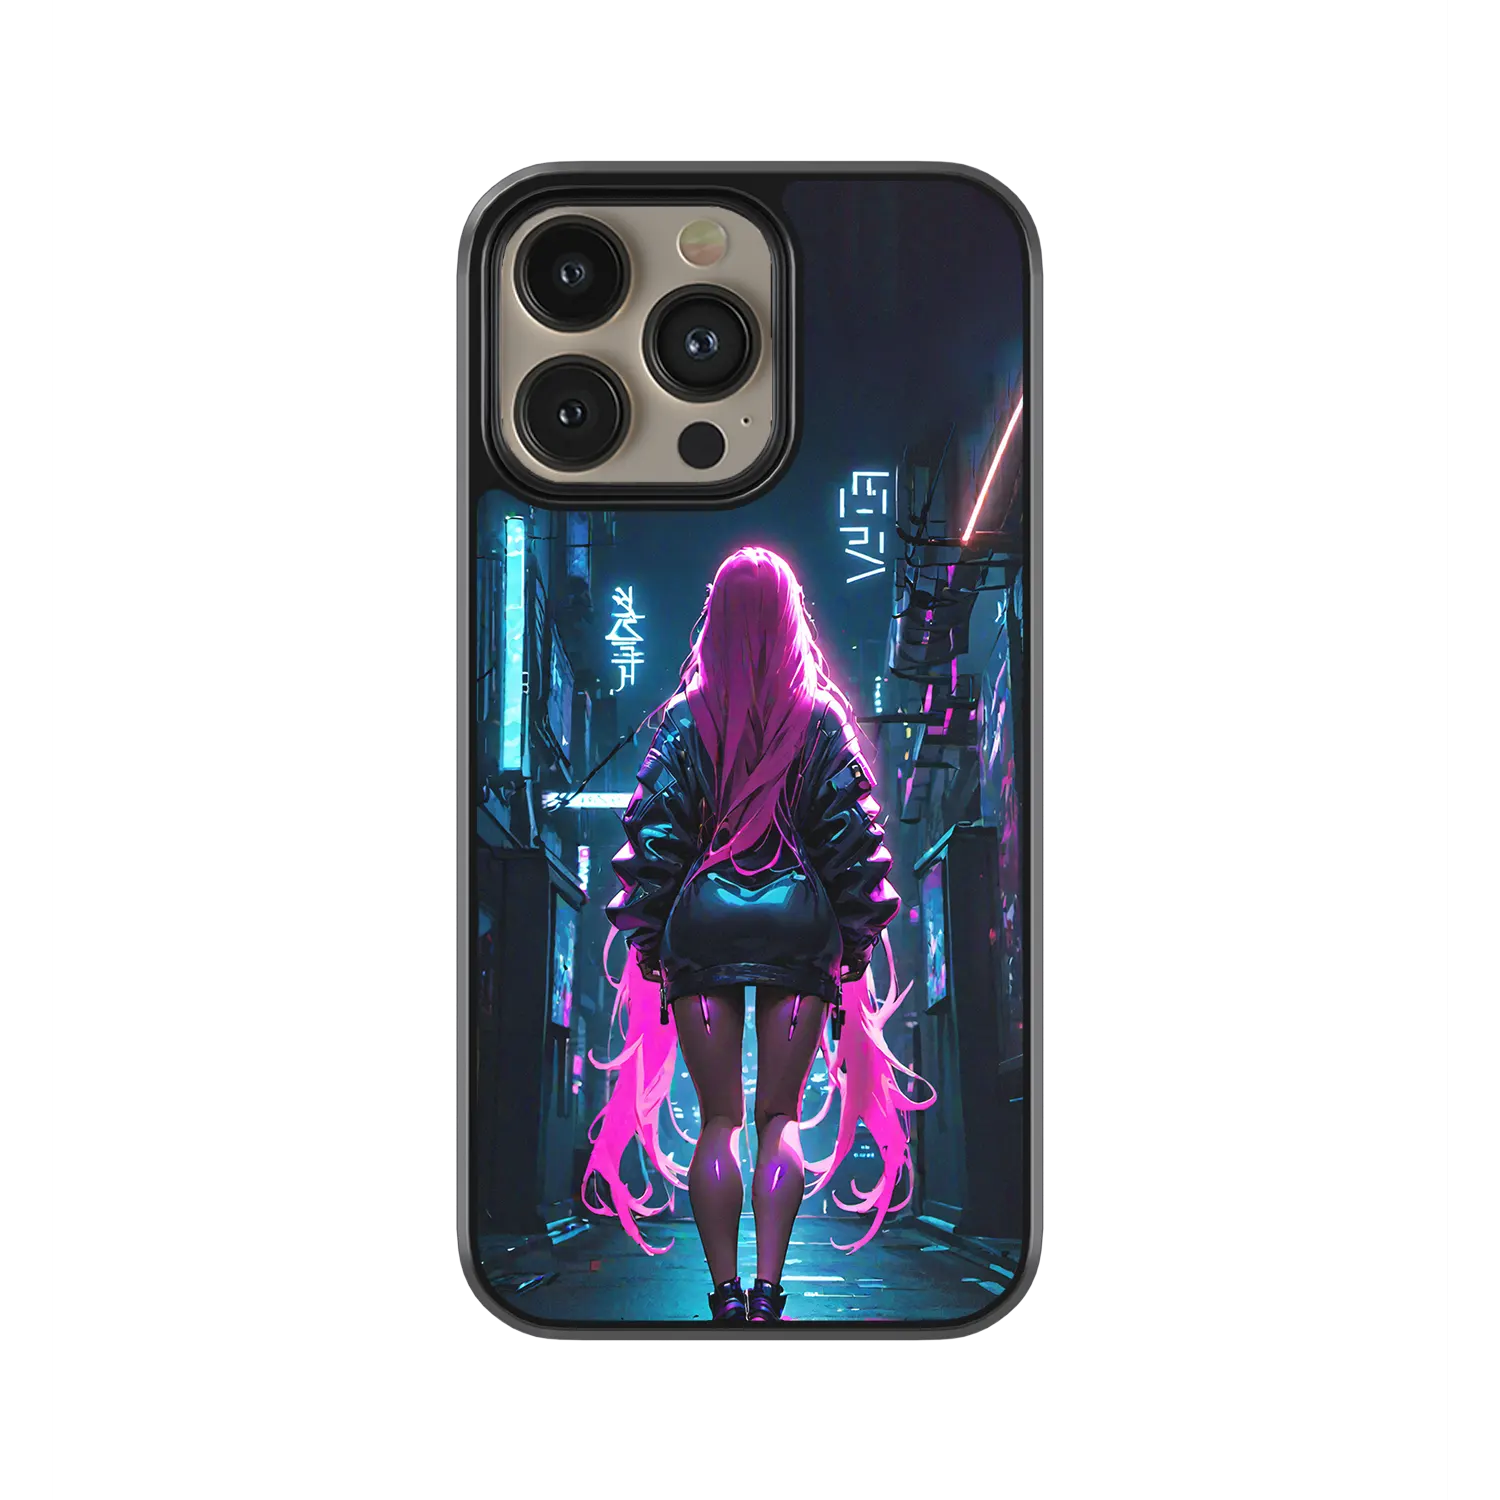 Tokyo Nights iphone 13 pro Max cover